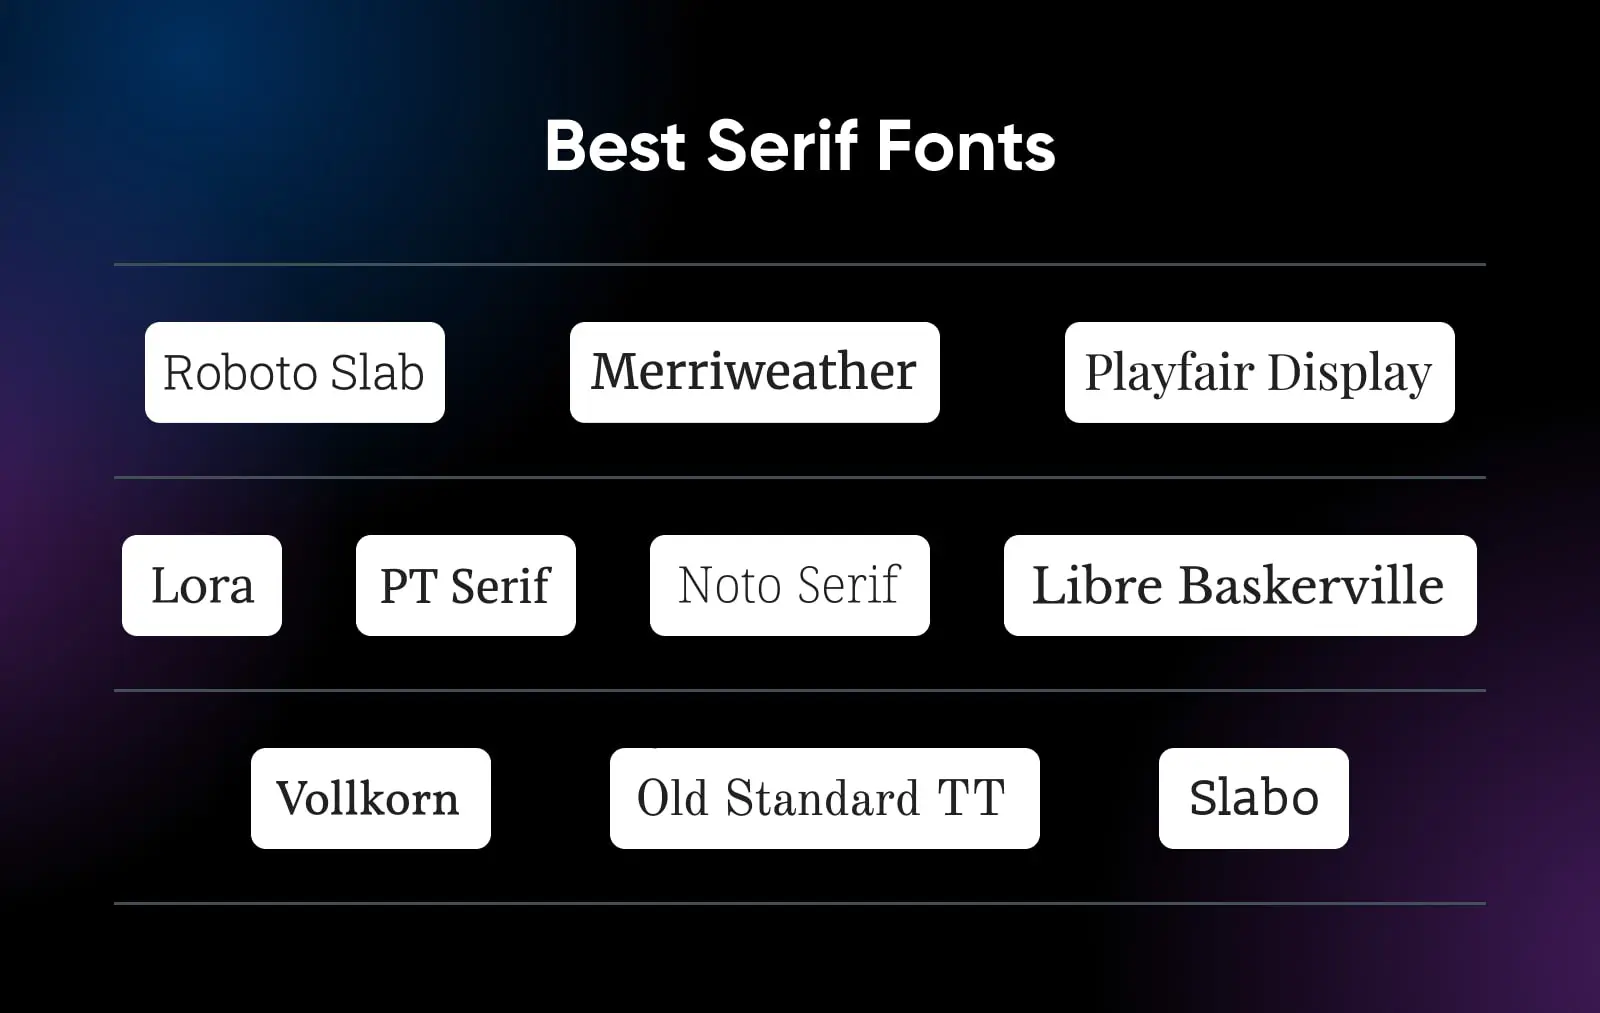 Best serif fonts showing an example of each of the ten fonts listed below